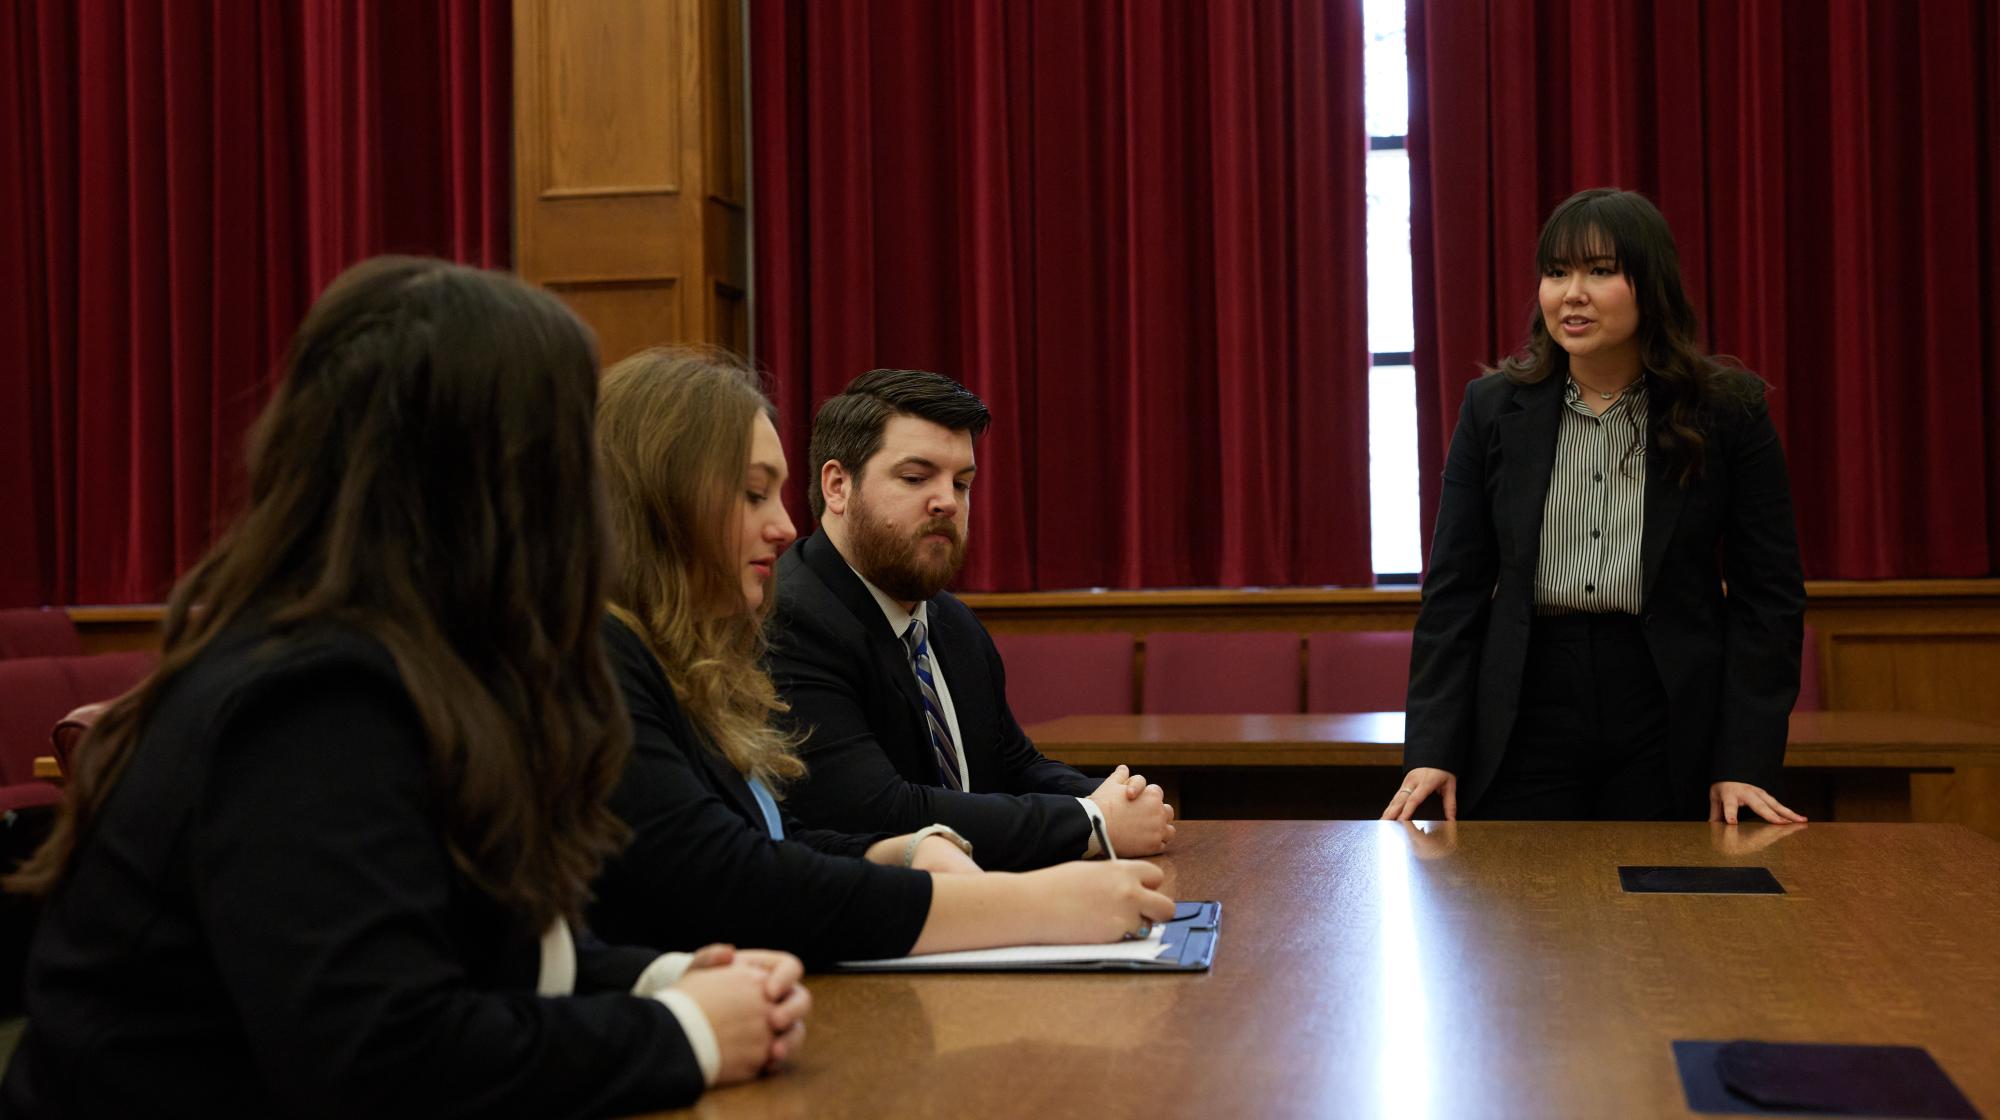 Students discussing strategy in courtroom.